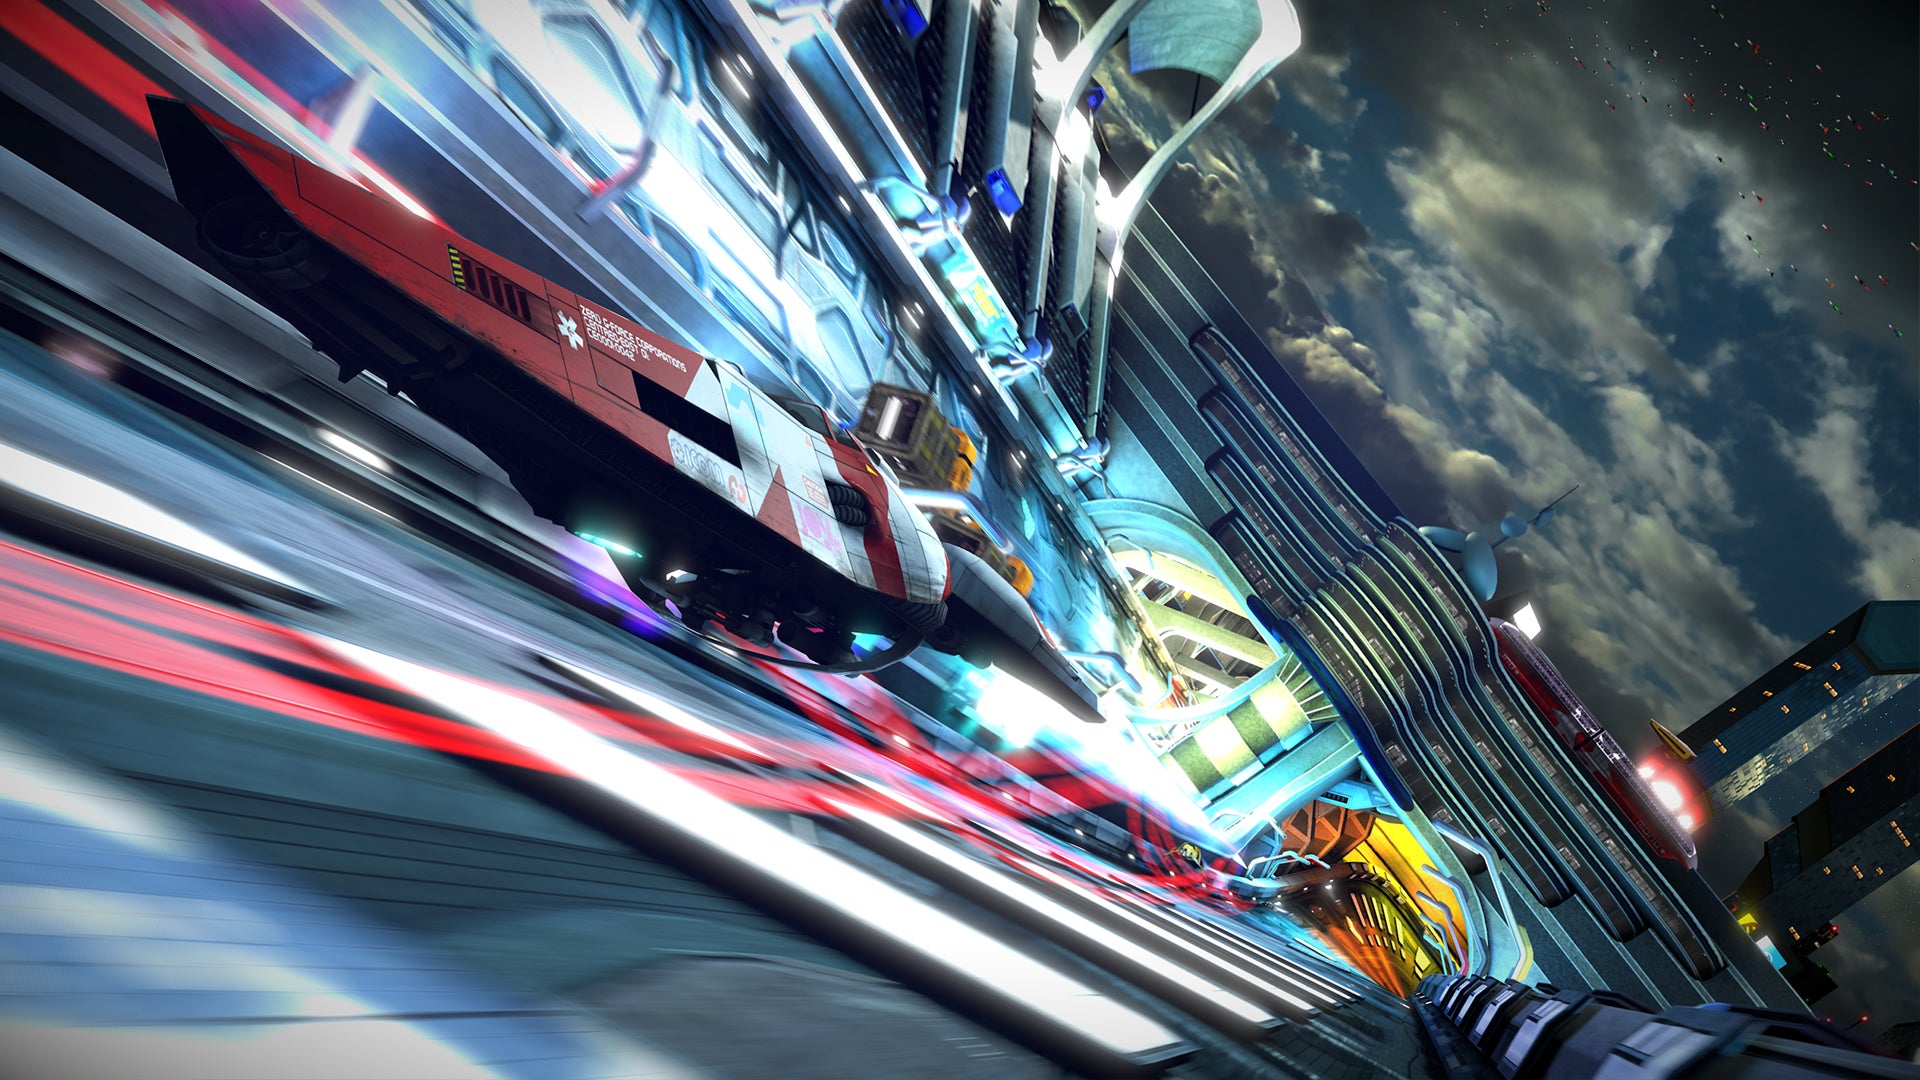 Image for WipEout Omega Collection - PS4 Pro's Ultimate 4K60 Showcase